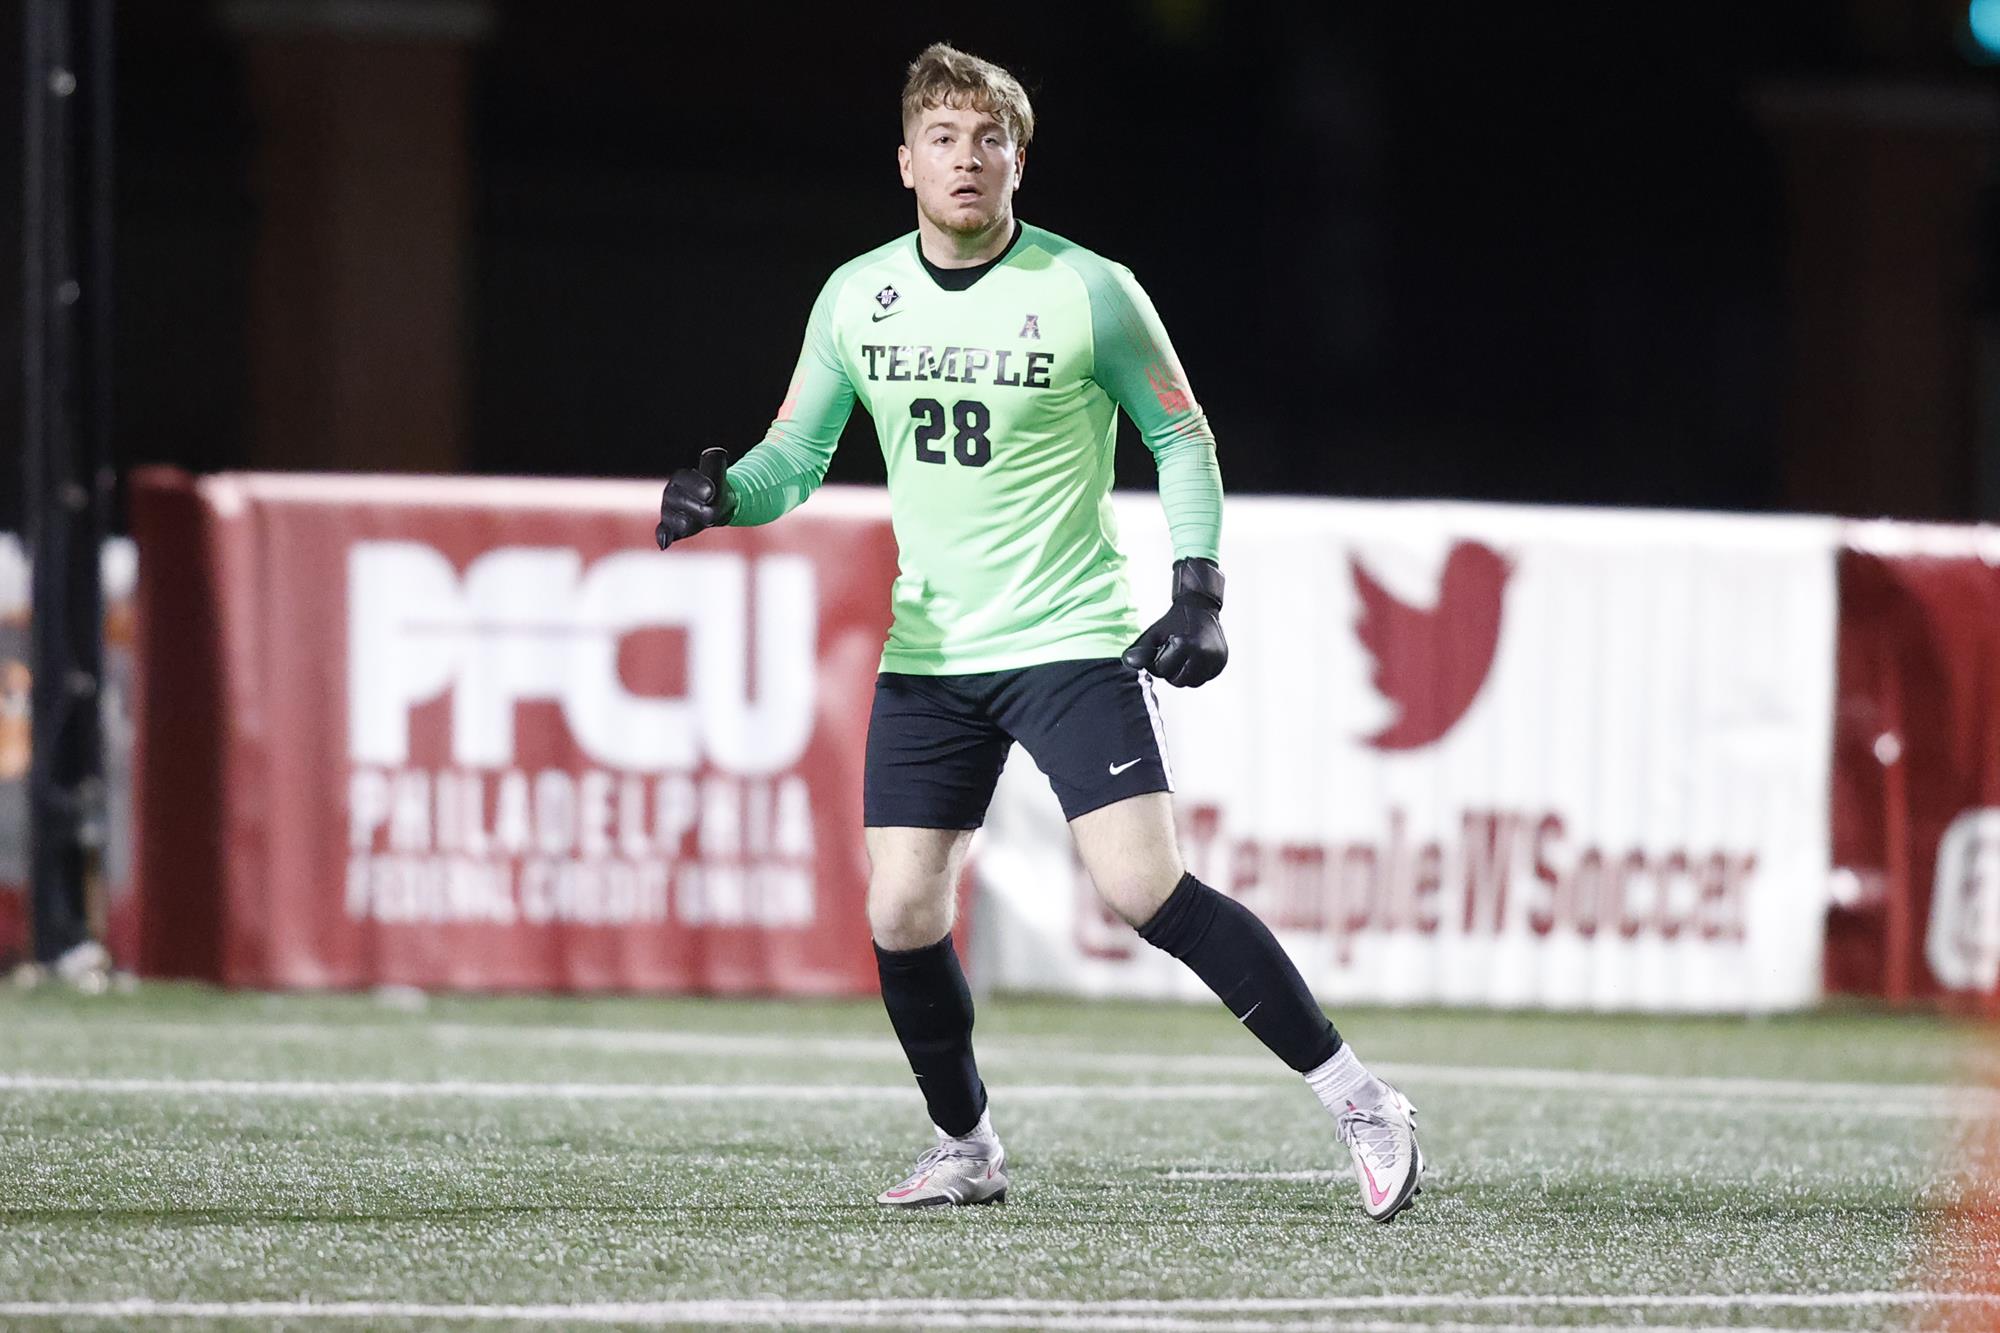 Temple's Eoin Gawronski stands on the field during a NCAA soccer game.